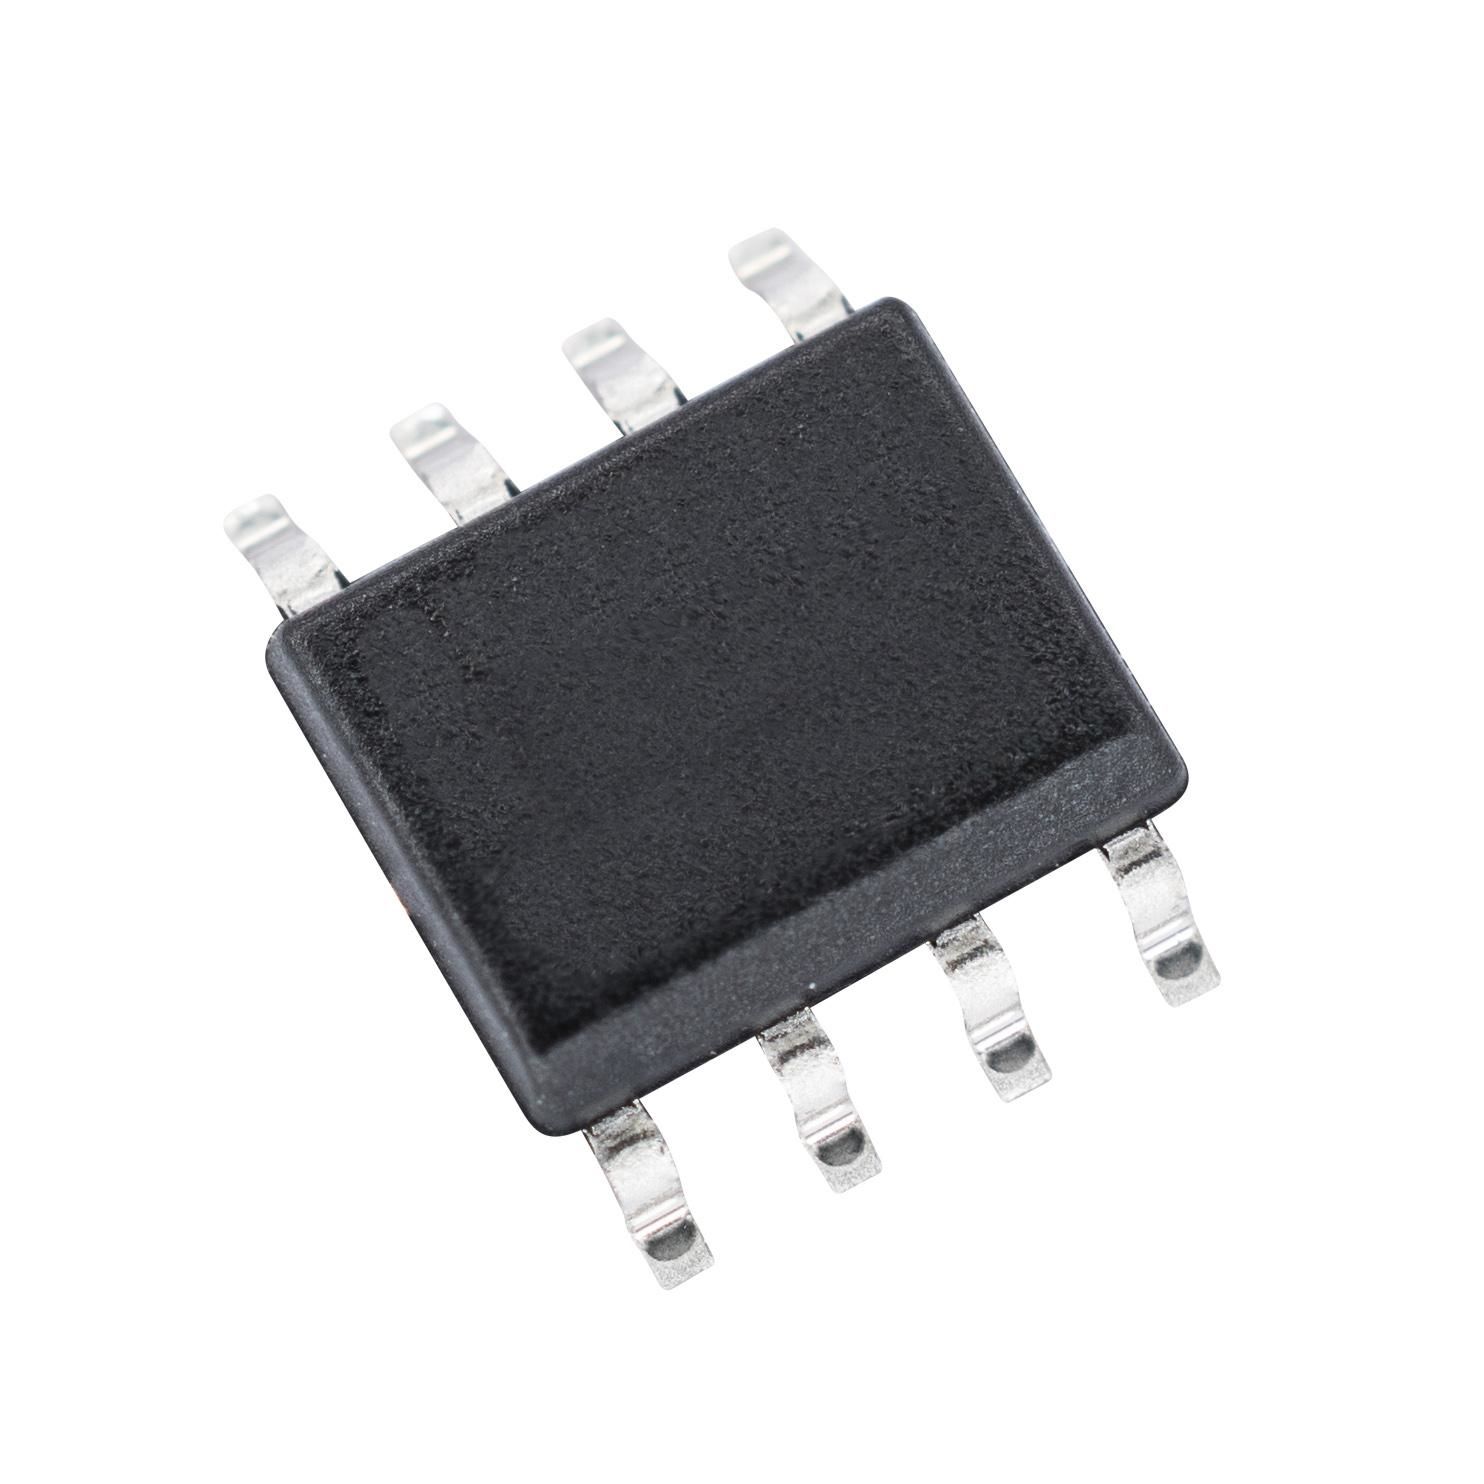 IRS21067   SOIC-8   POWER MANAGEMENT IC